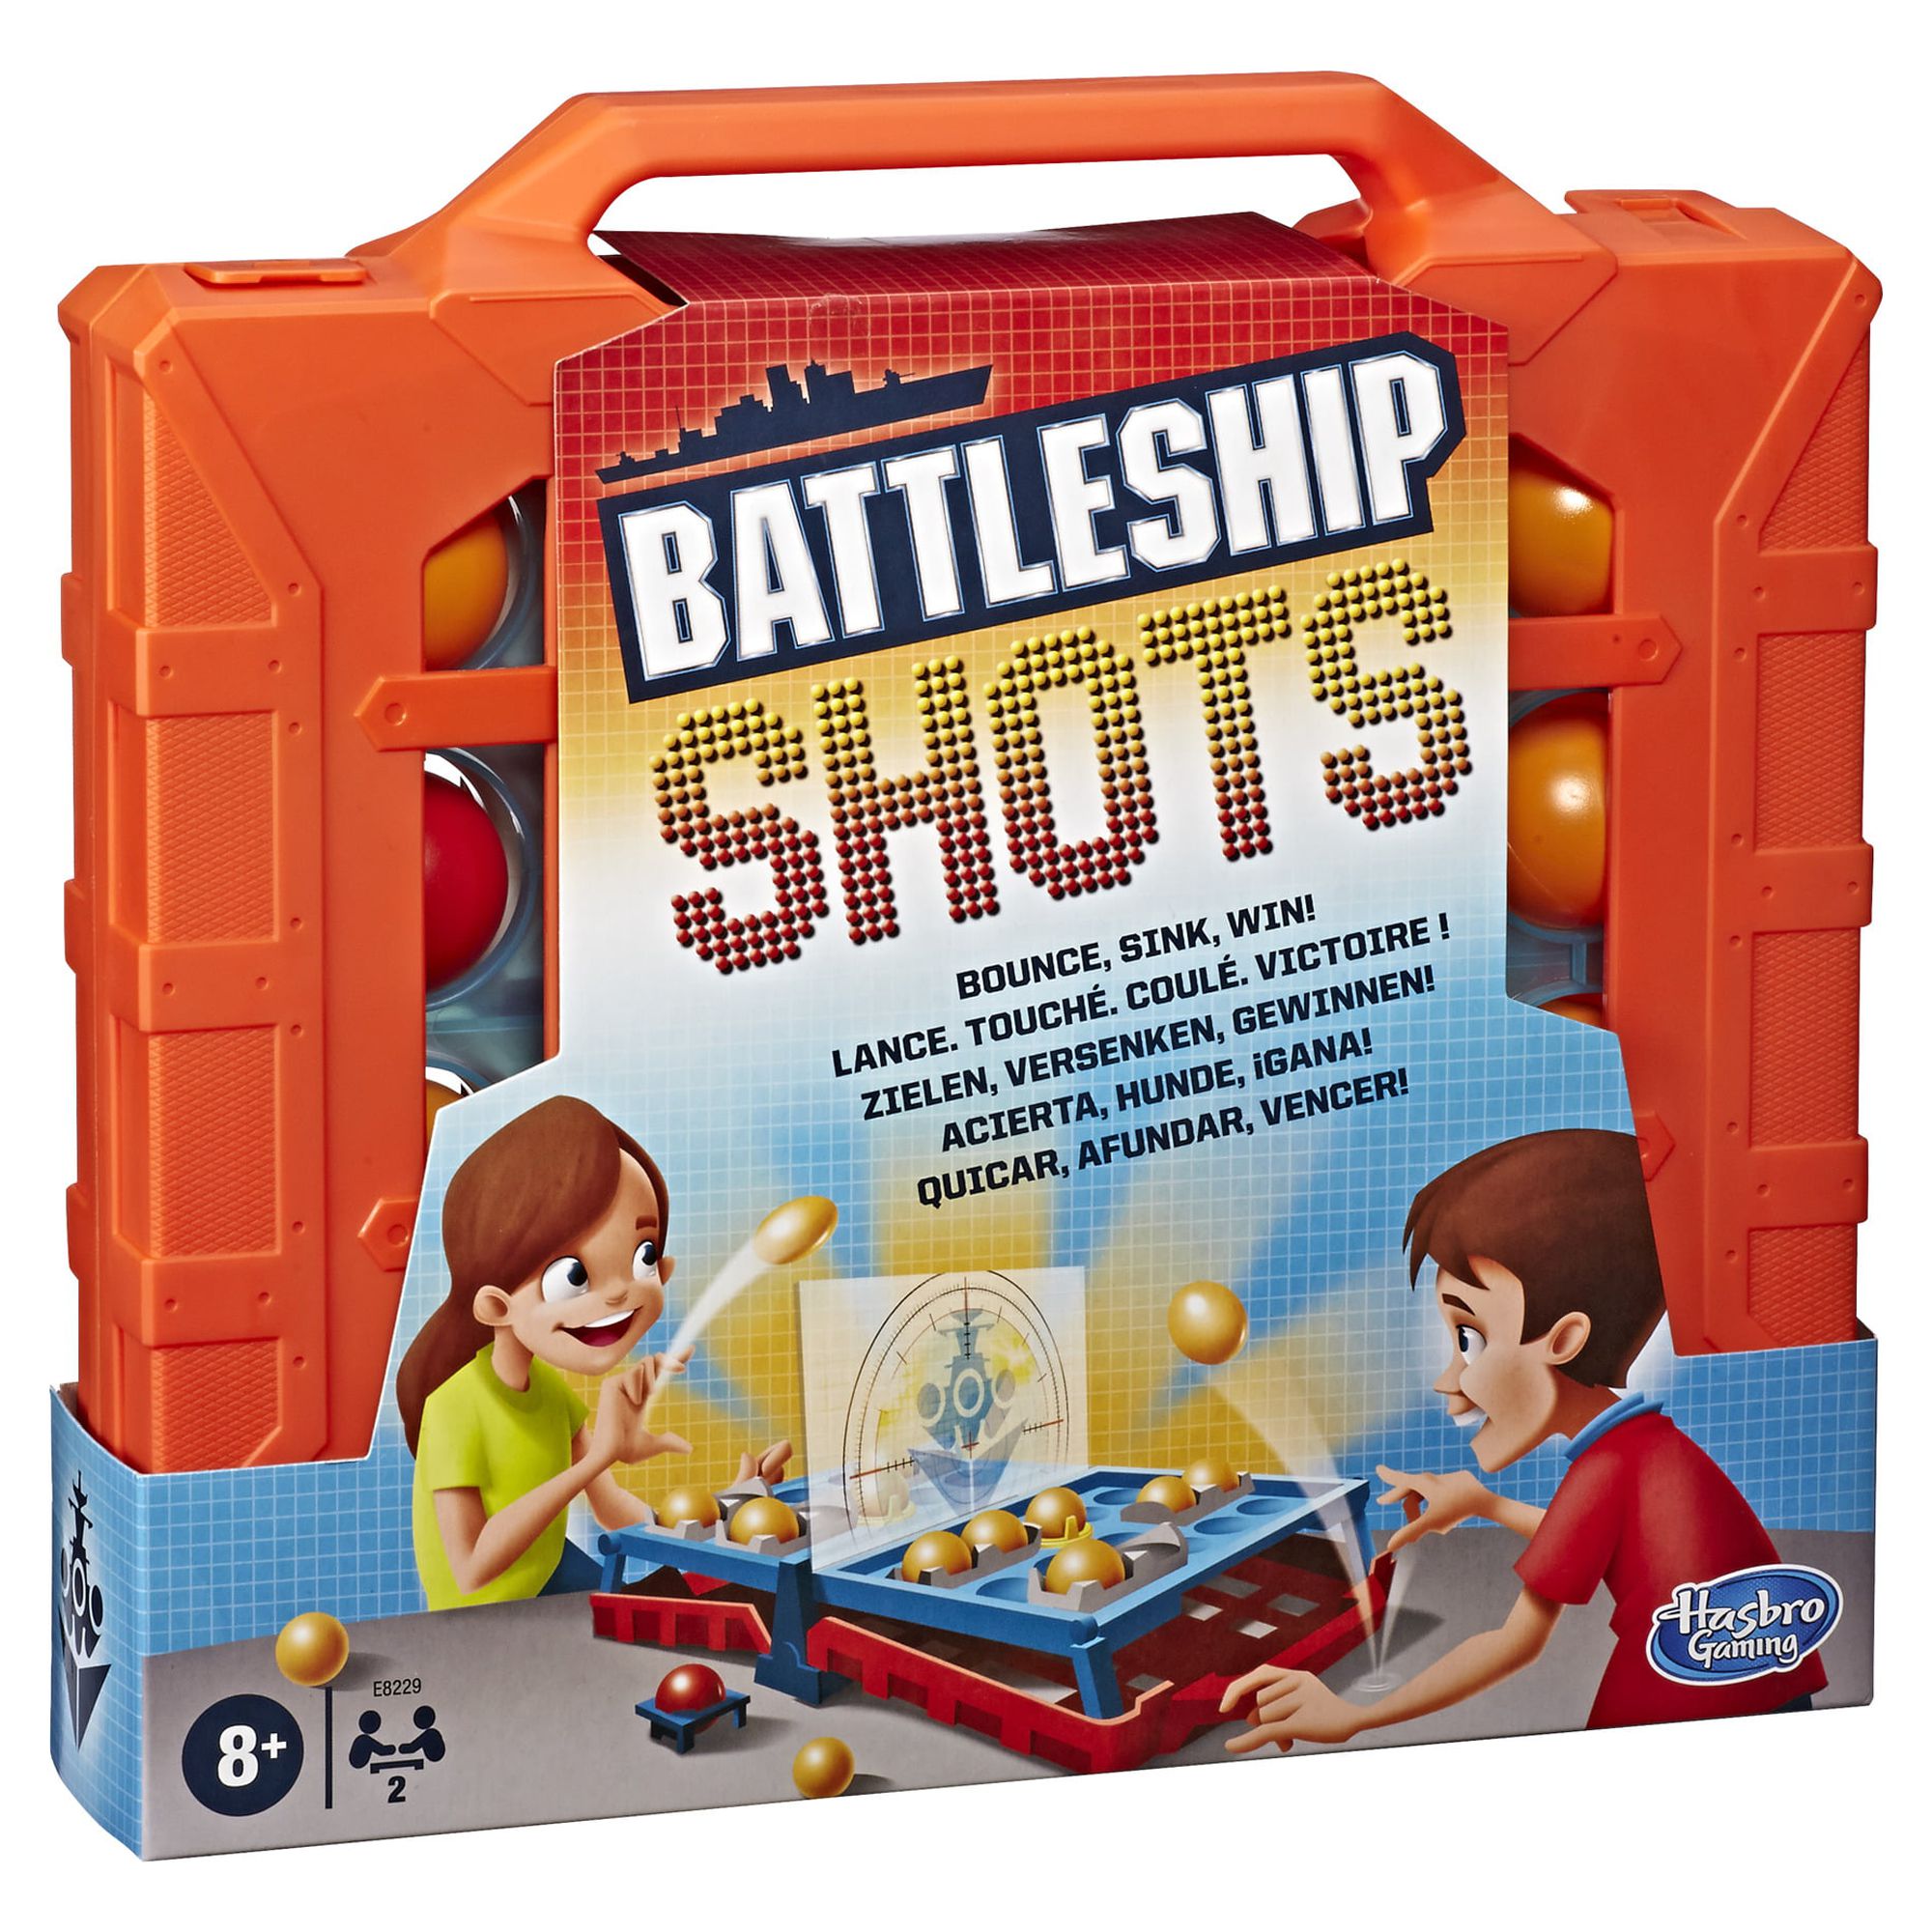 Battleship Shots Board Game for Kids and Family Ages 8 and Up, 2 Players - image 1 of 8